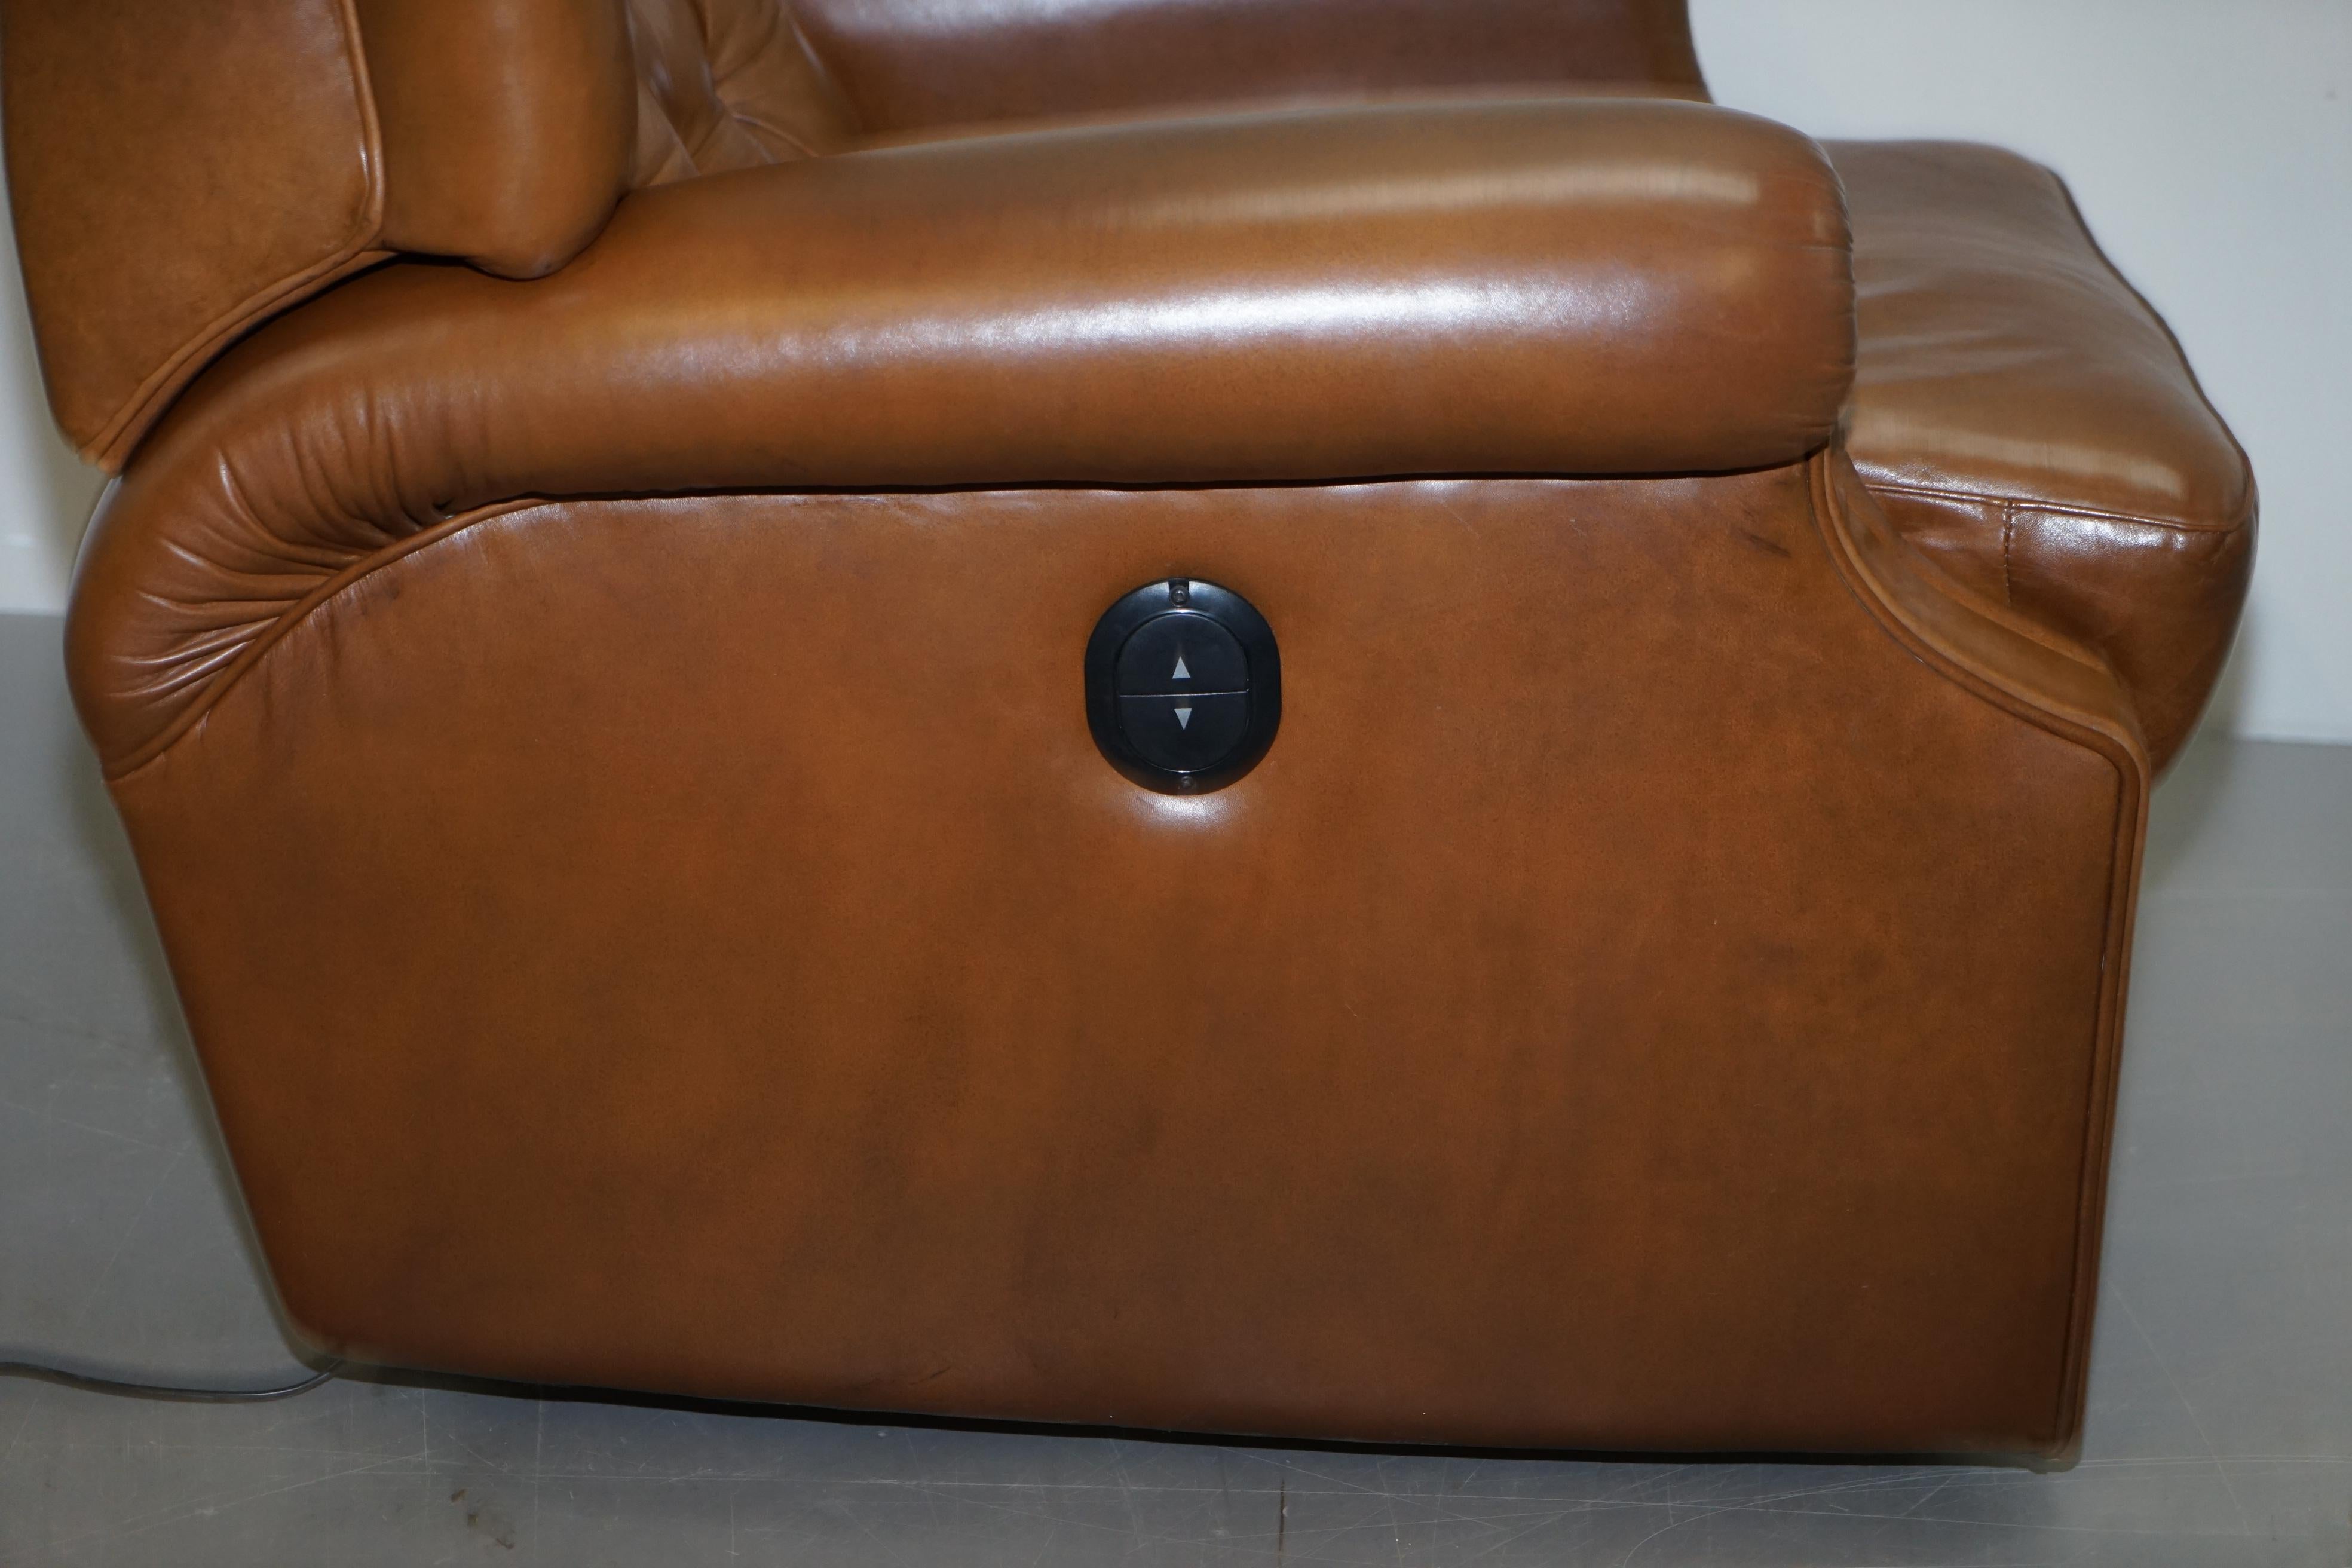 Lovely Tan Brown Leather Chesterfield Electric Relciner Armchair Comfortable!!!! 5